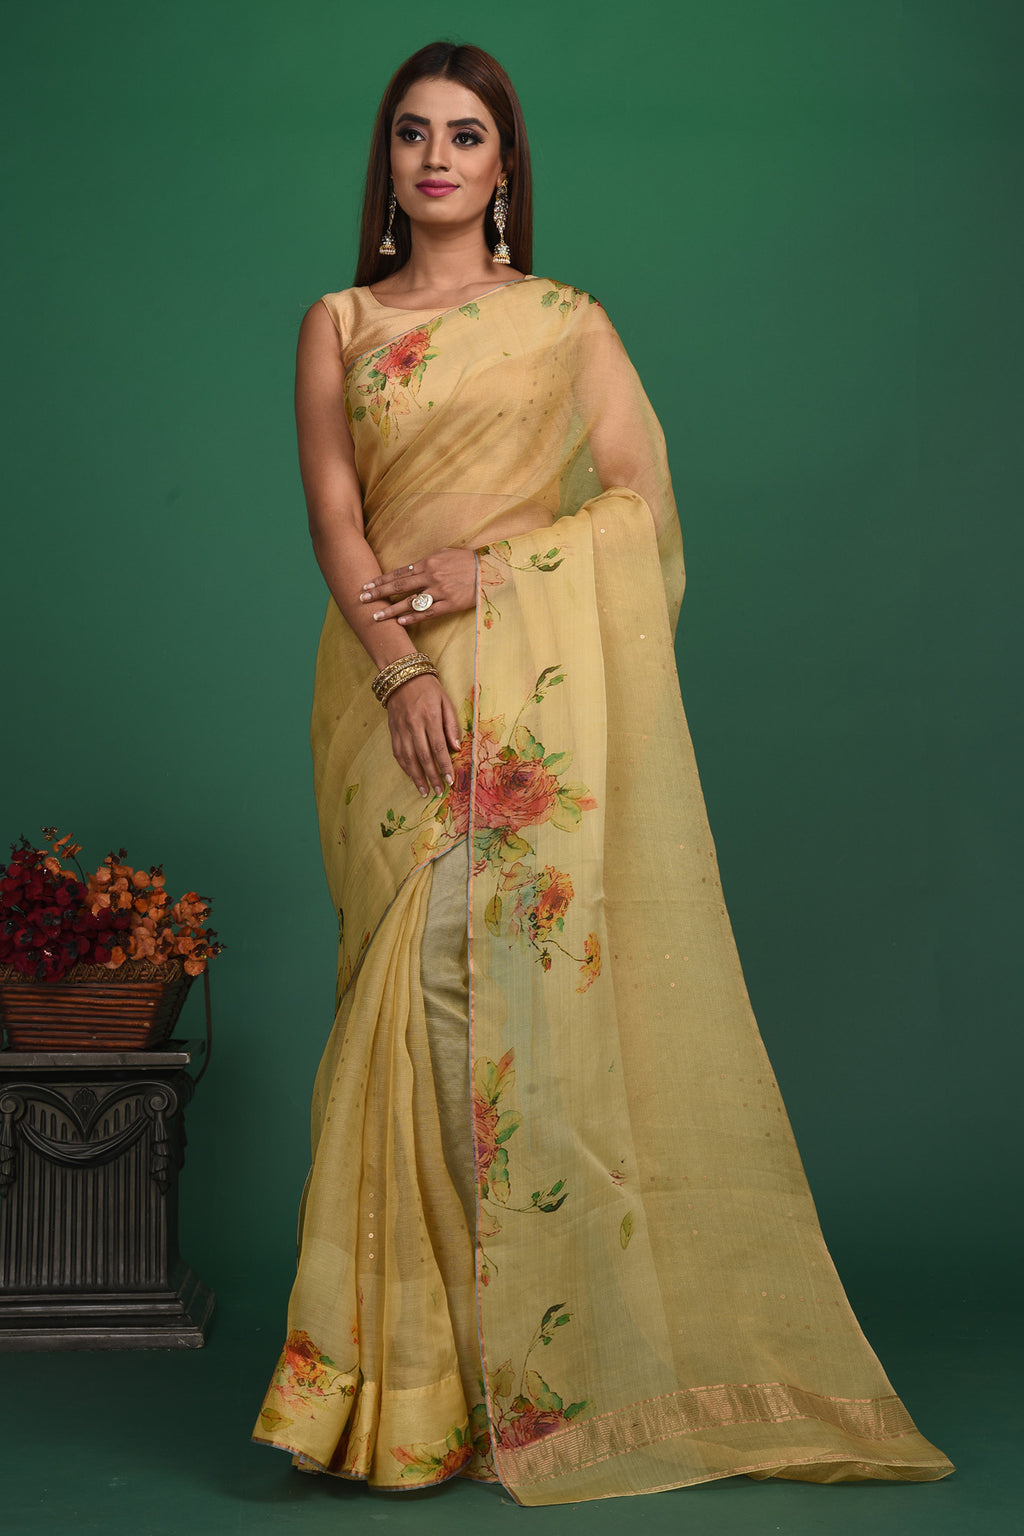 Buy this royal handcrafted weaving saree in cotton silk in light yellow color online in USA. It also has a Pallu with bronze weave and fringes. The entire saree has a Golden border and enhance with a beautiful floral pattern.  Make it yours and flaunt a handwoven marvel with minimal jewellery for a casual day outfit. Add this coton silk saree to your collection from Pure Elegance Indian fashion store in USA.-Full view with open pallu.